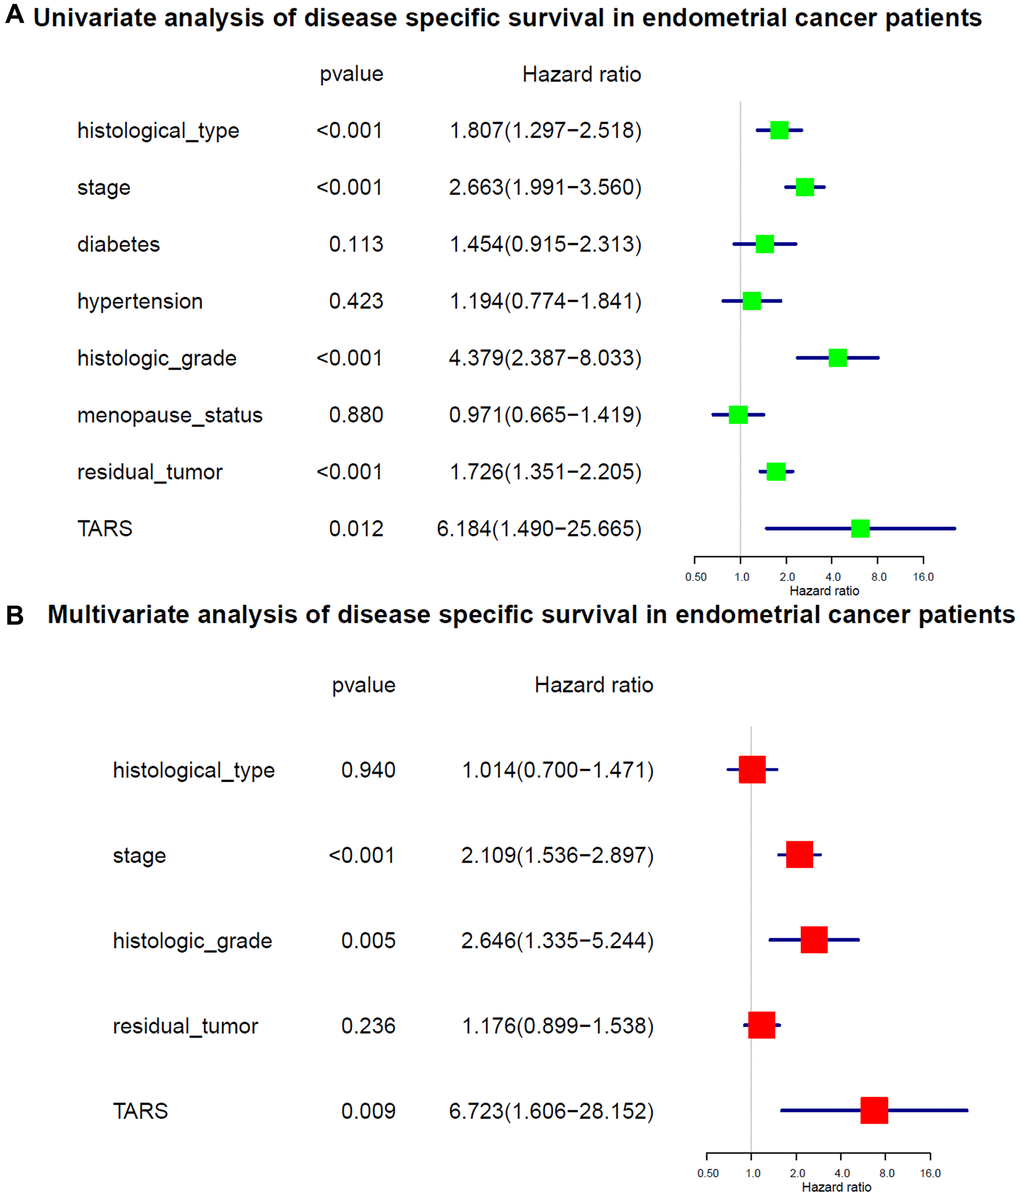 Cox analysis of disease specific survival. (A) Univariate analysis of disease specific survival. (B) Multivariate analysis of disease specific survival.